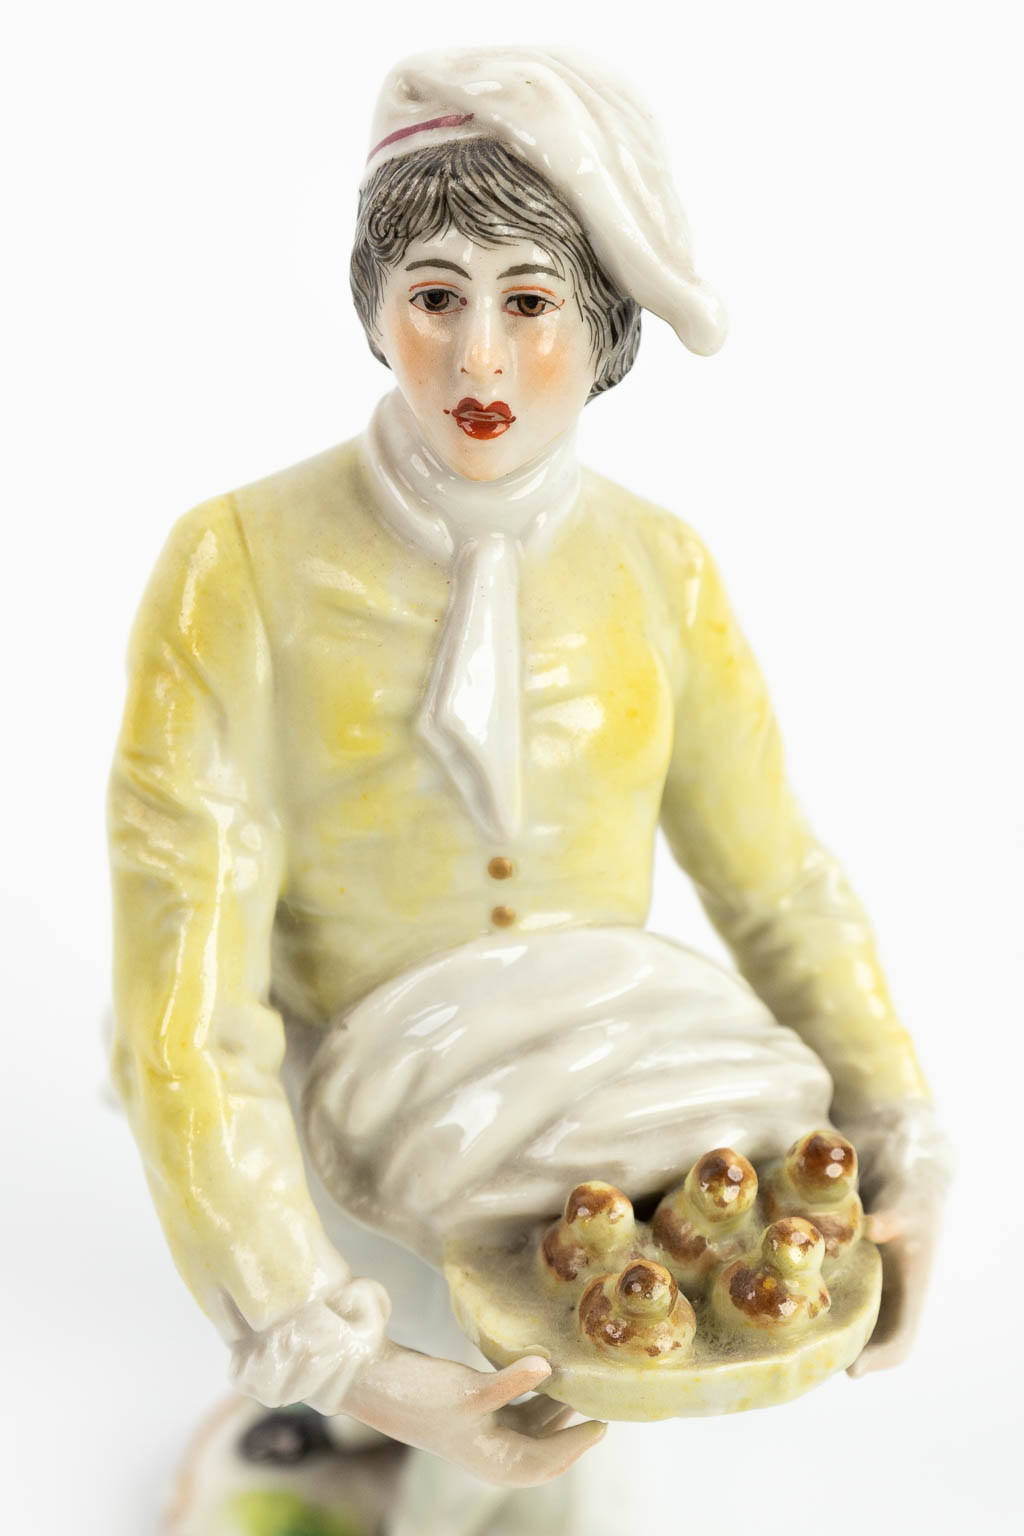 A pair of statues made of porcelain made in Germany and marked Ludwigsburg. (H:18cm)